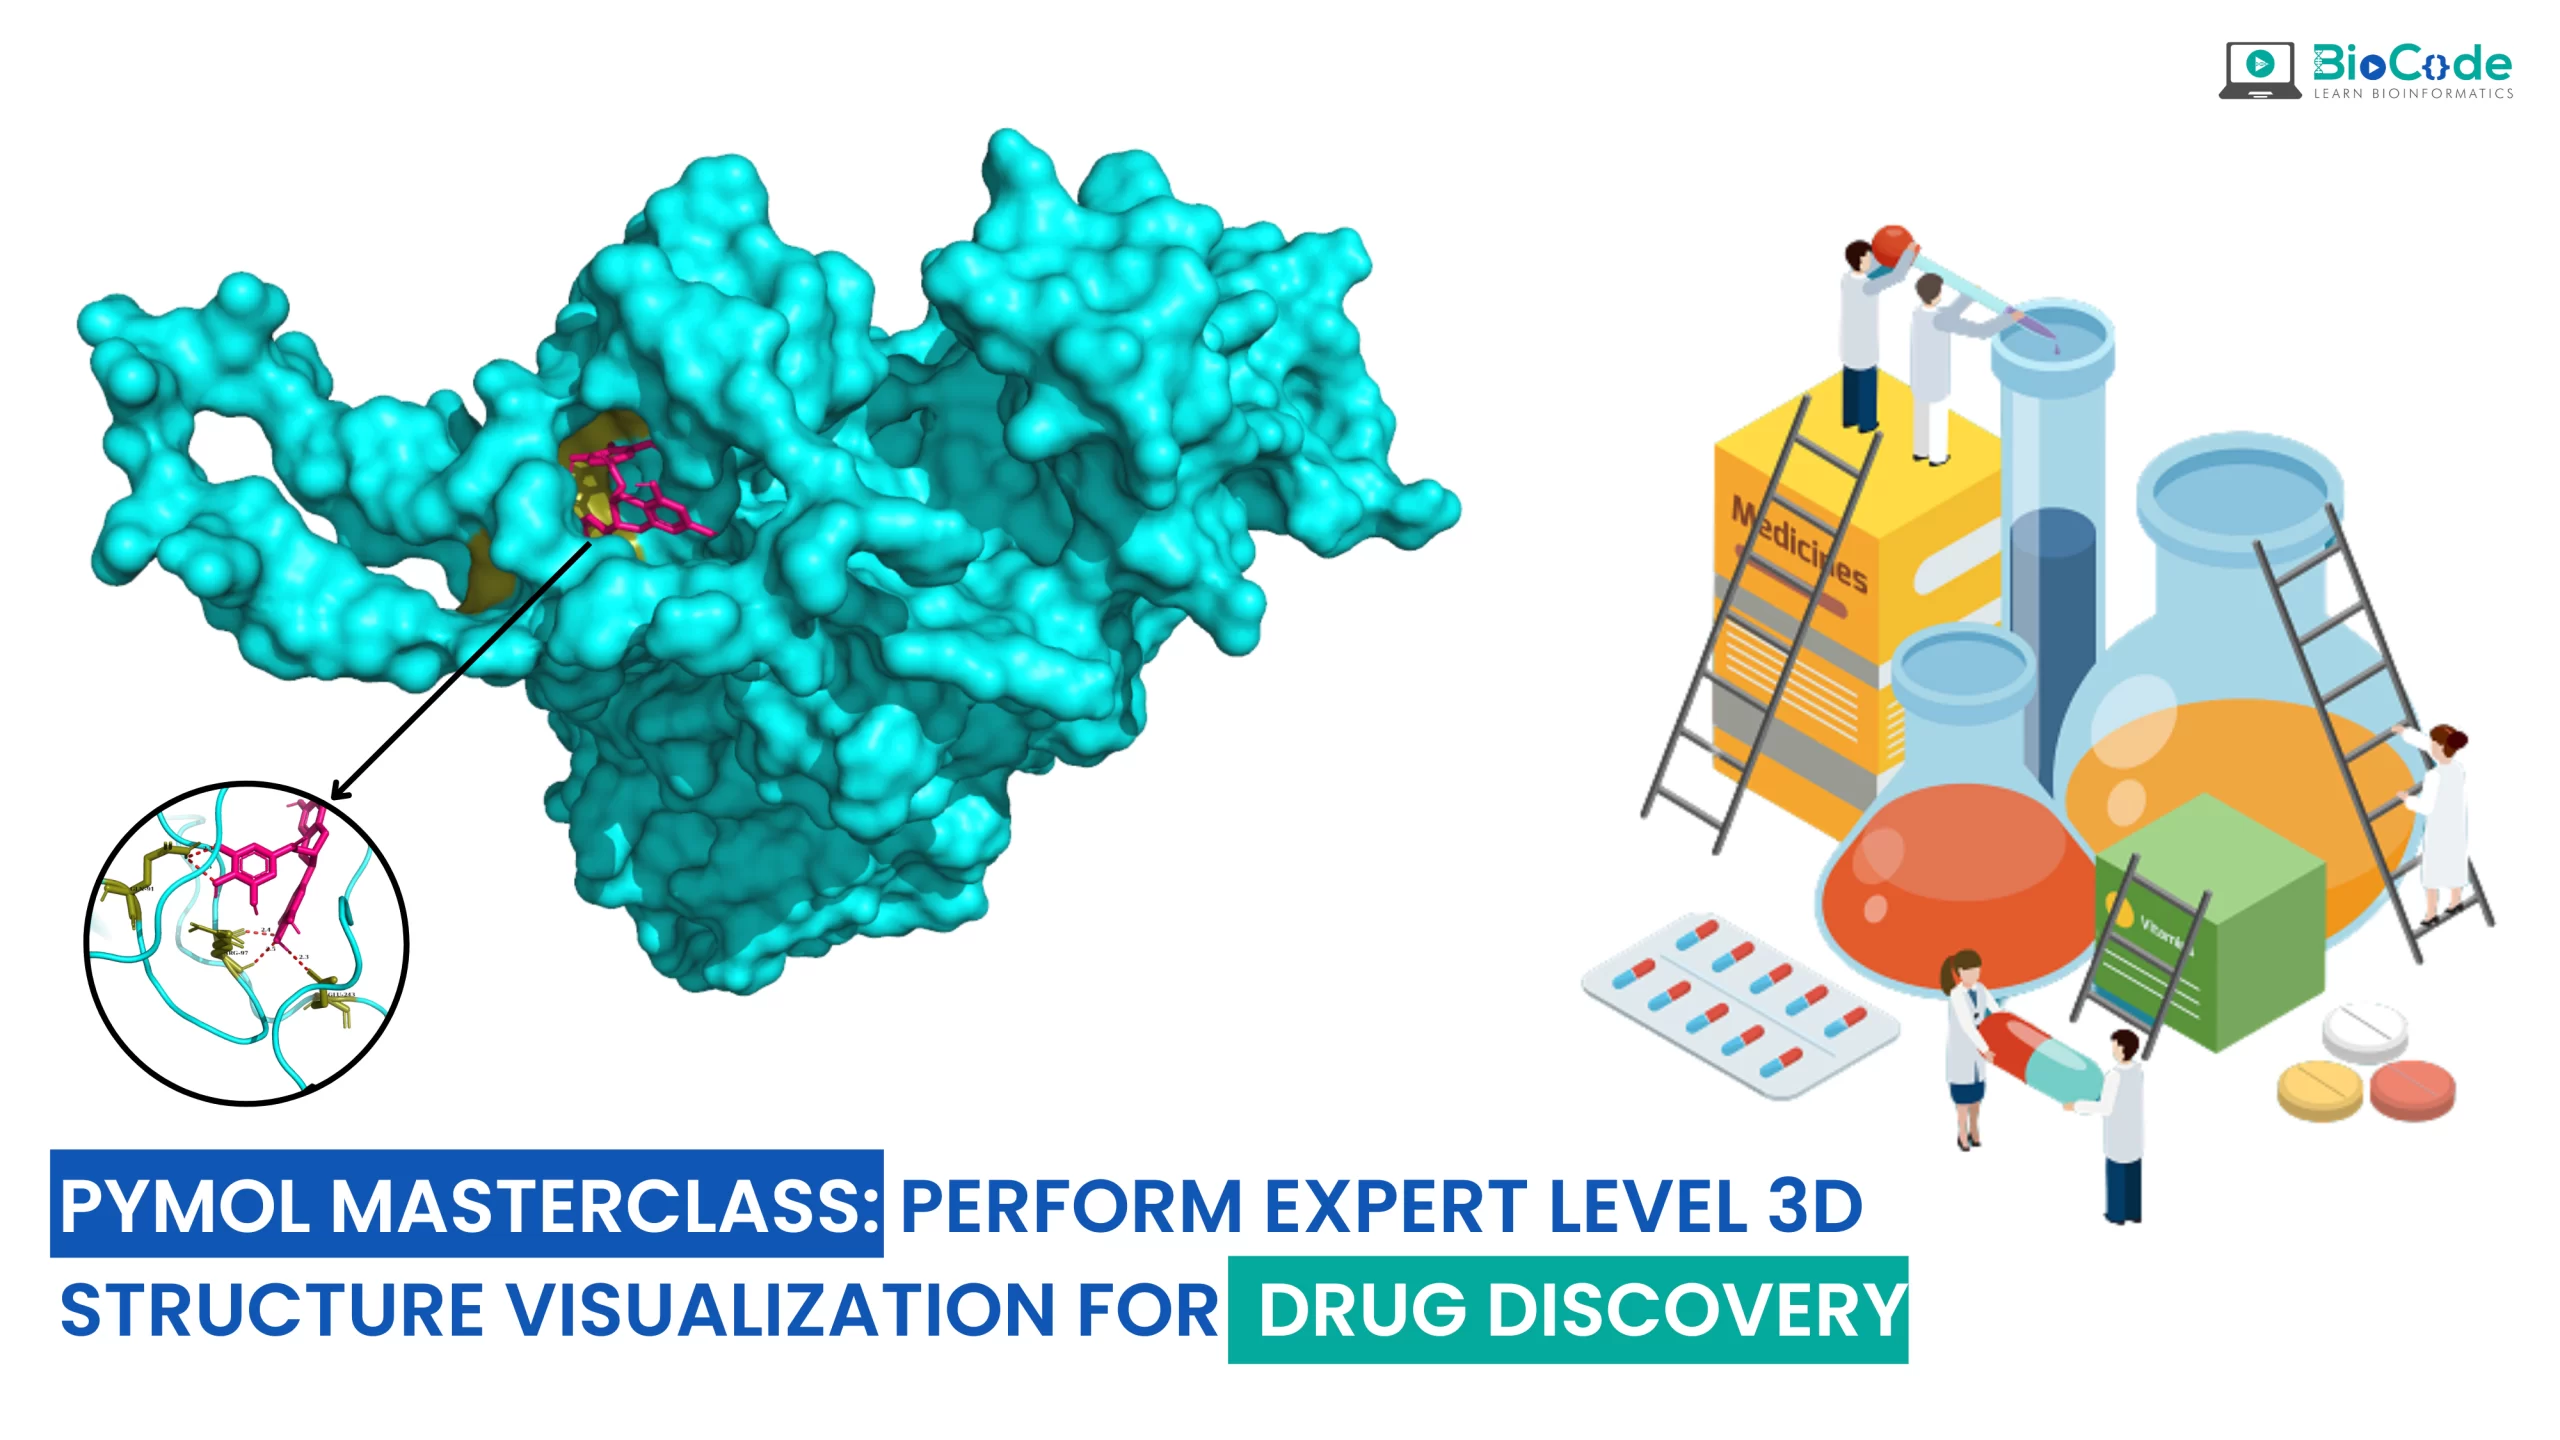 PyMol MasterClass: Perform Expert Level 3D Structure Visualization for Drug Discovery